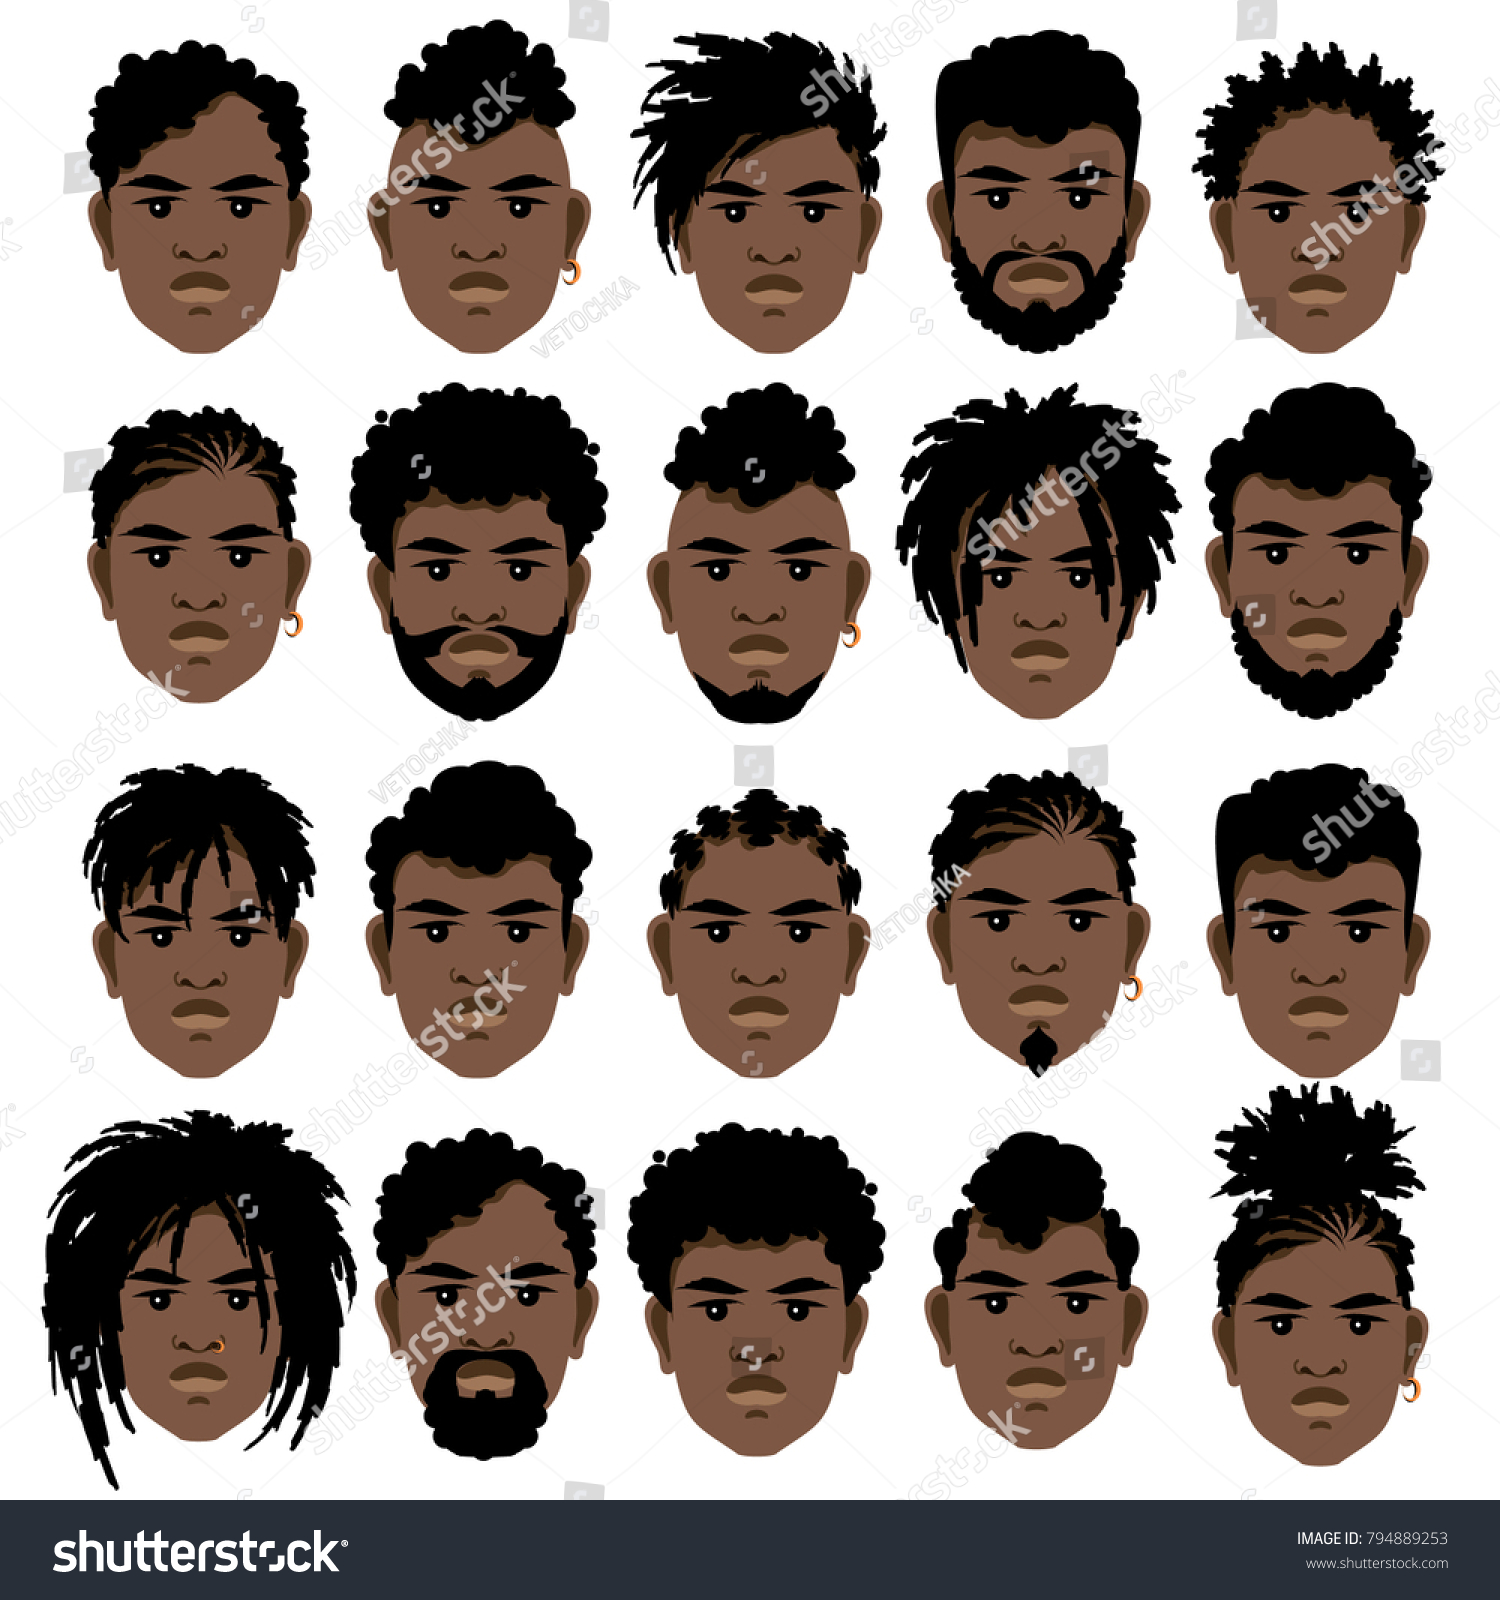 SVG of Set of cartoon faces of black men with different hairstyles, beard and mustache. Vector illustration. svg